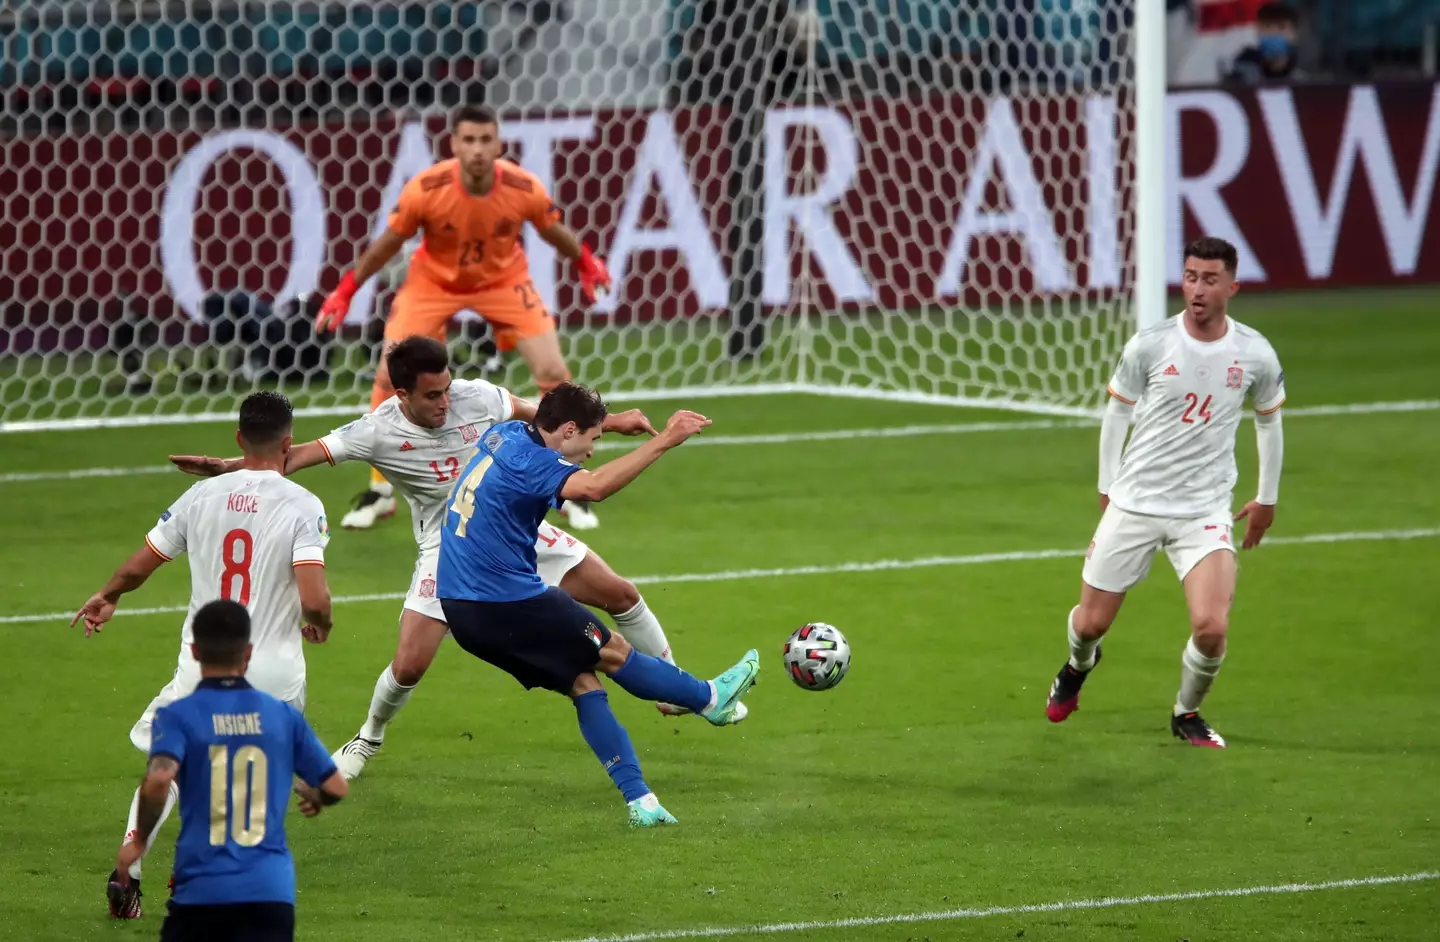 Chiesa scores a brilliant goal vs Spain in the Euro 2020 semi final. Image: PA Images